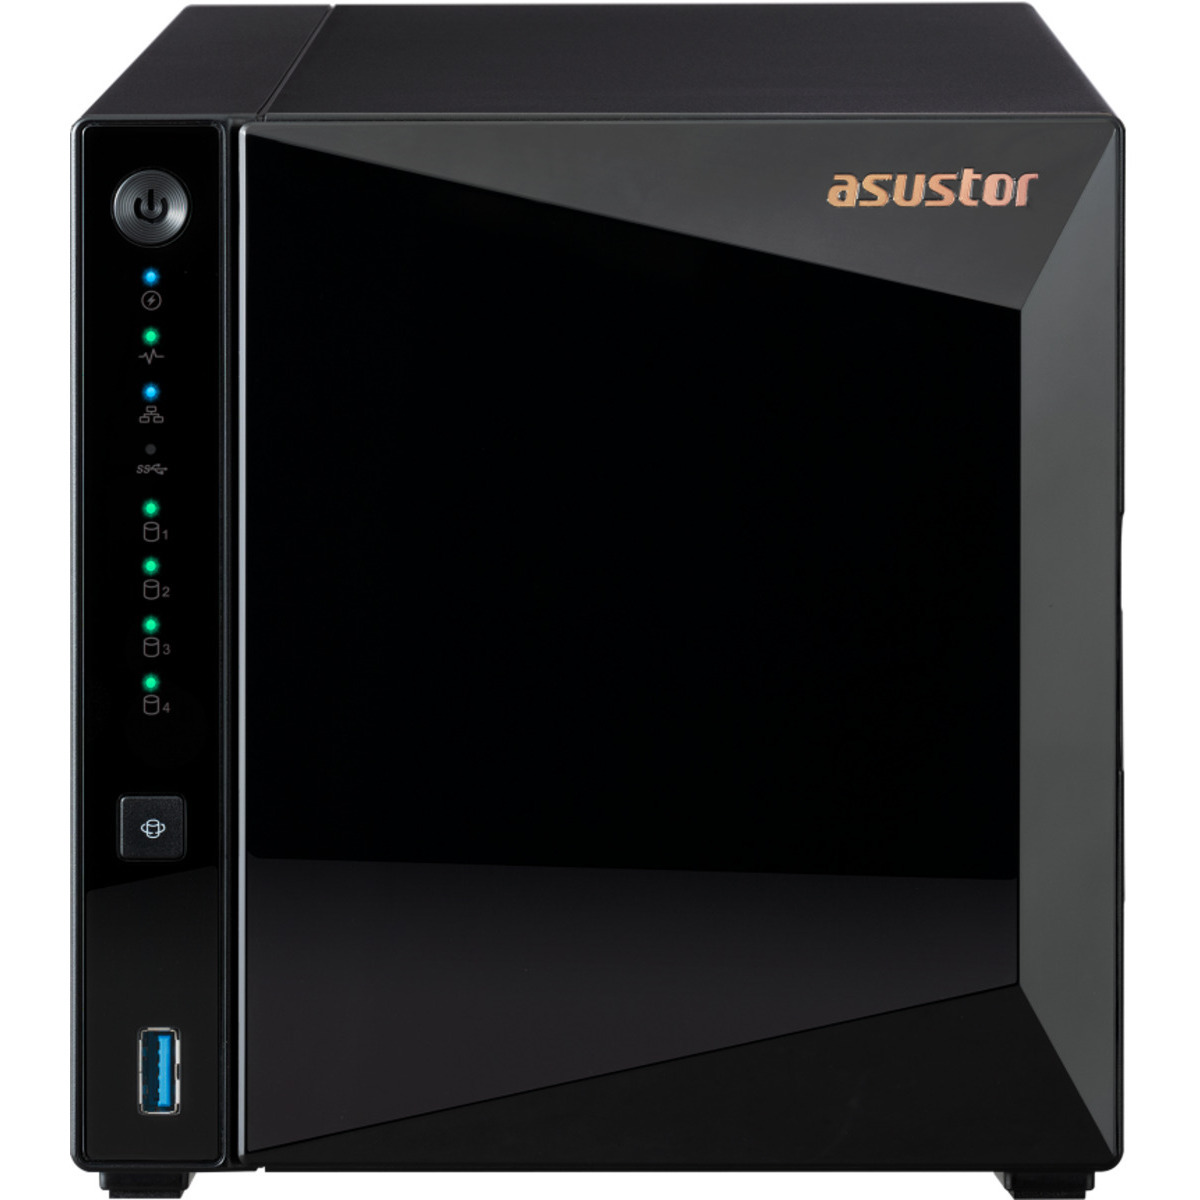 ASUSTOR DRIVESTOR 4 Pro AS3304T 96tb 4-Bay Desktop Personal / Basic Home / Small Office NAS - Network Attached Storage Device 4x24tb Western Digital Ultrastar HC580 WUH722424ALE6L4 3.5 7200rpm SATA 6Gb/s HDD ENTERPRISE Class Drives Installed - Burn-In Tested DRIVESTOR 4 Pro AS3304T